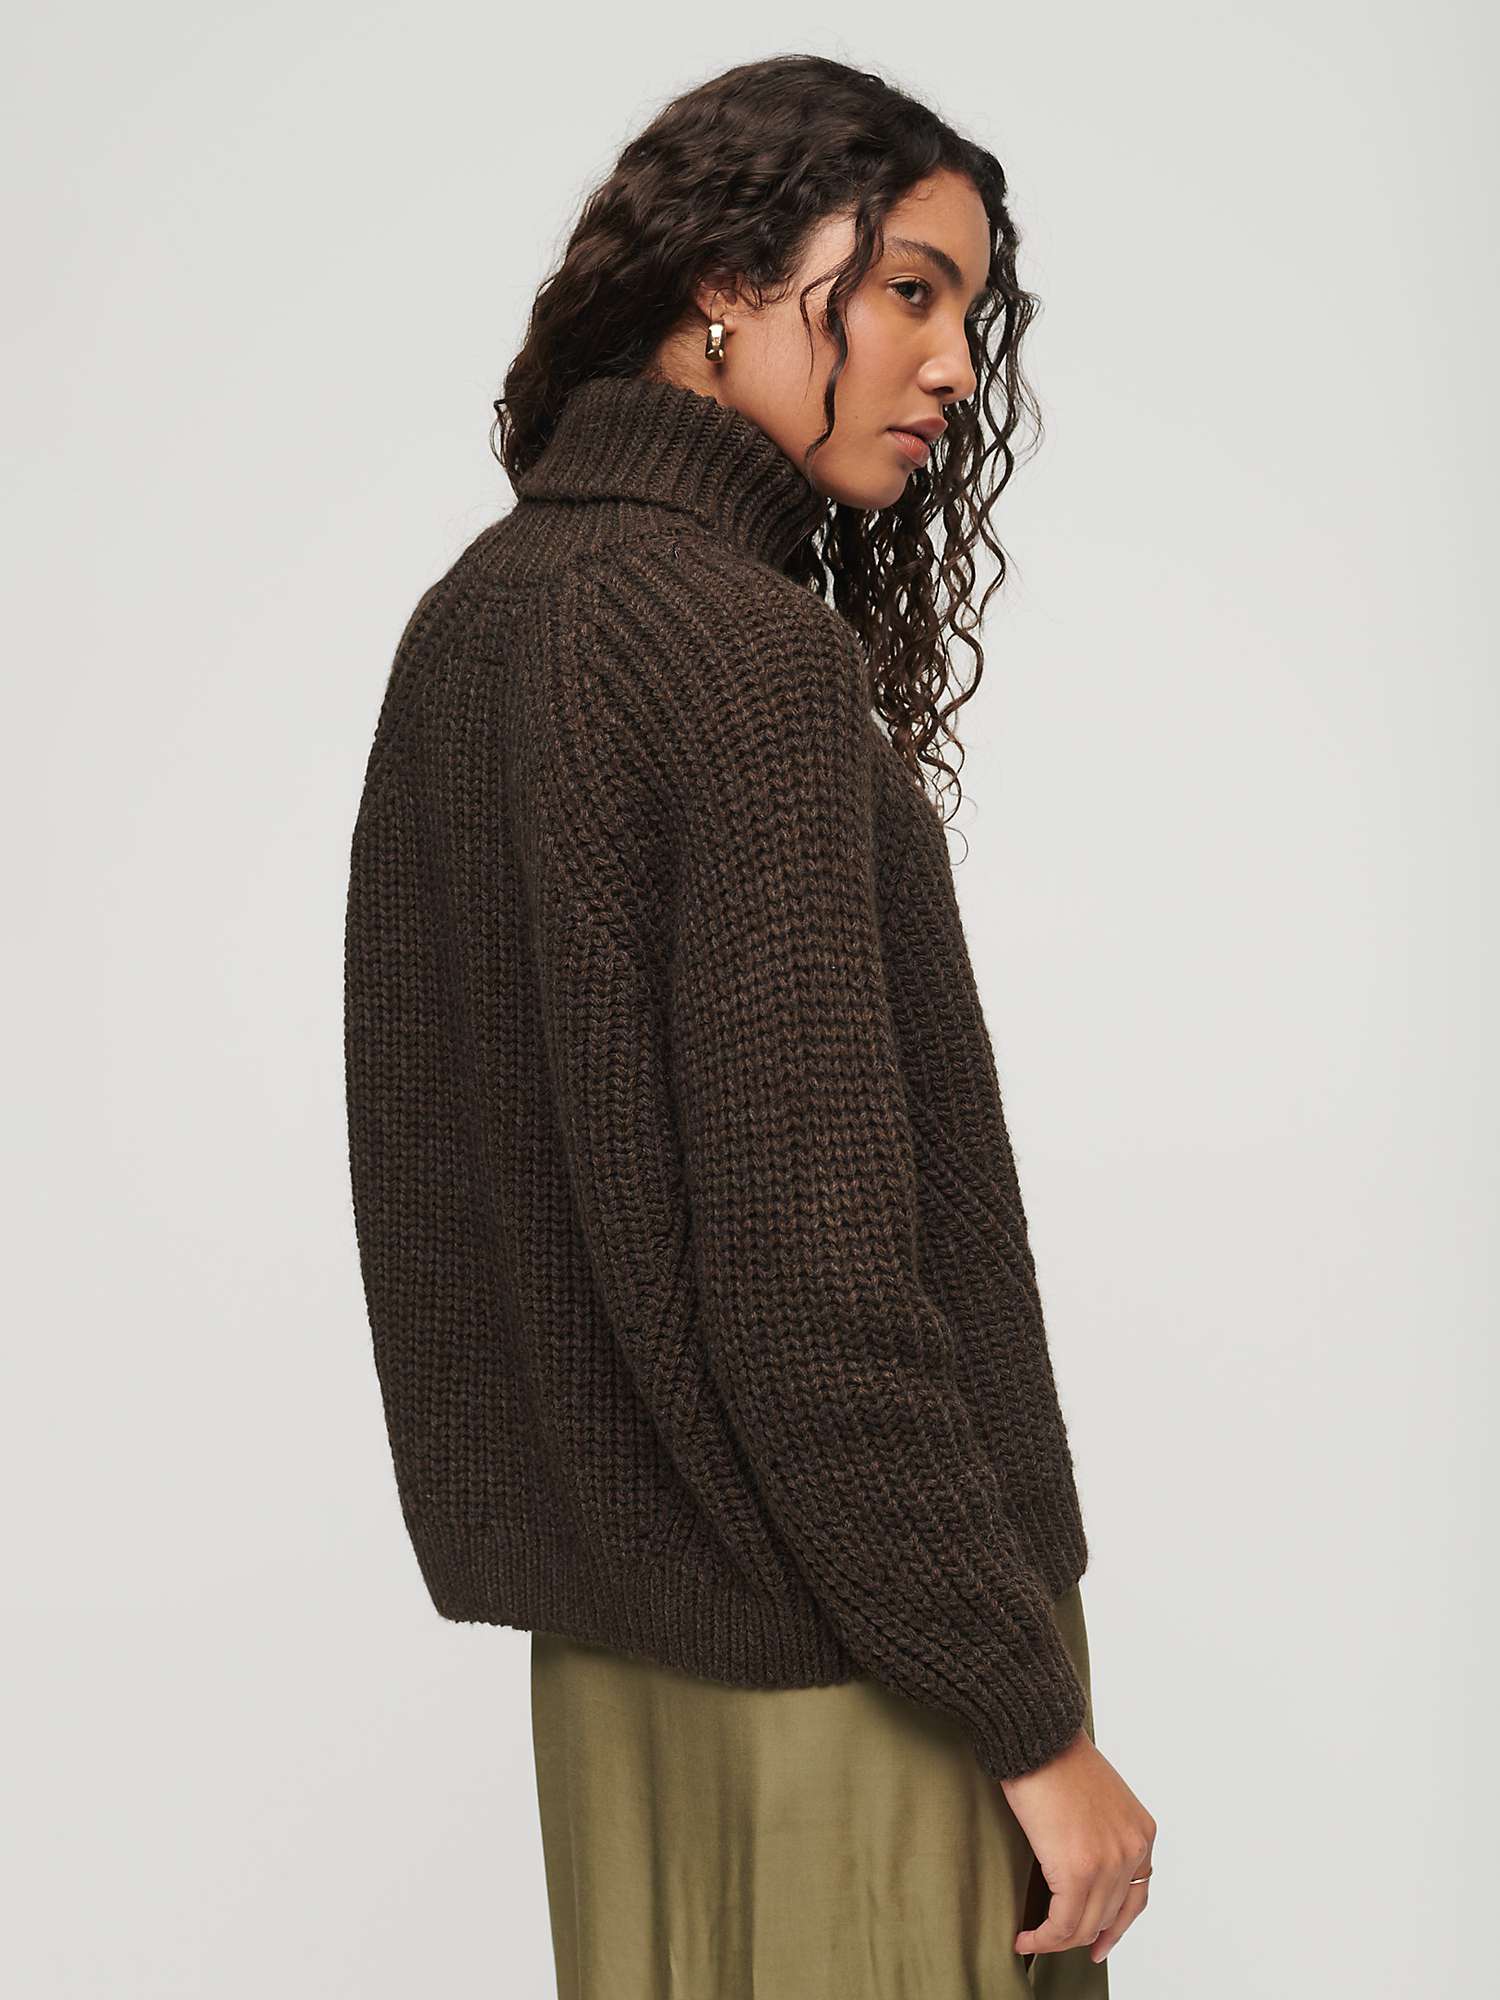 Buy Superdry Slouchy Stitch Roll Neck Wool Blend Jumper, Coco Marl Online at johnlewis.com